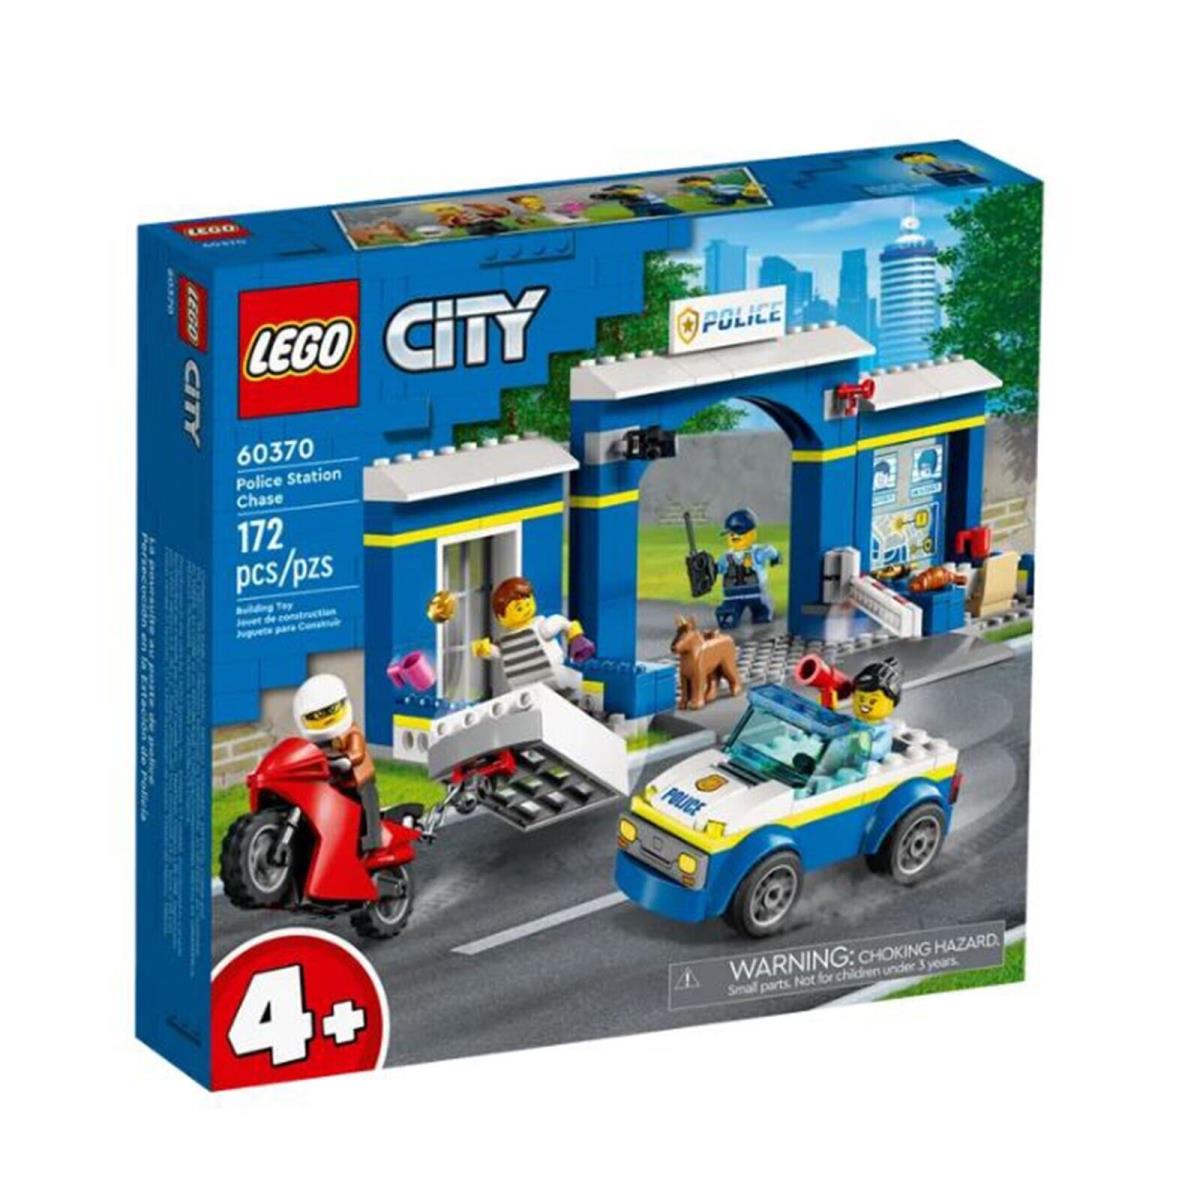 Lego City Police Station Chase Building Set 60370 IN Stock